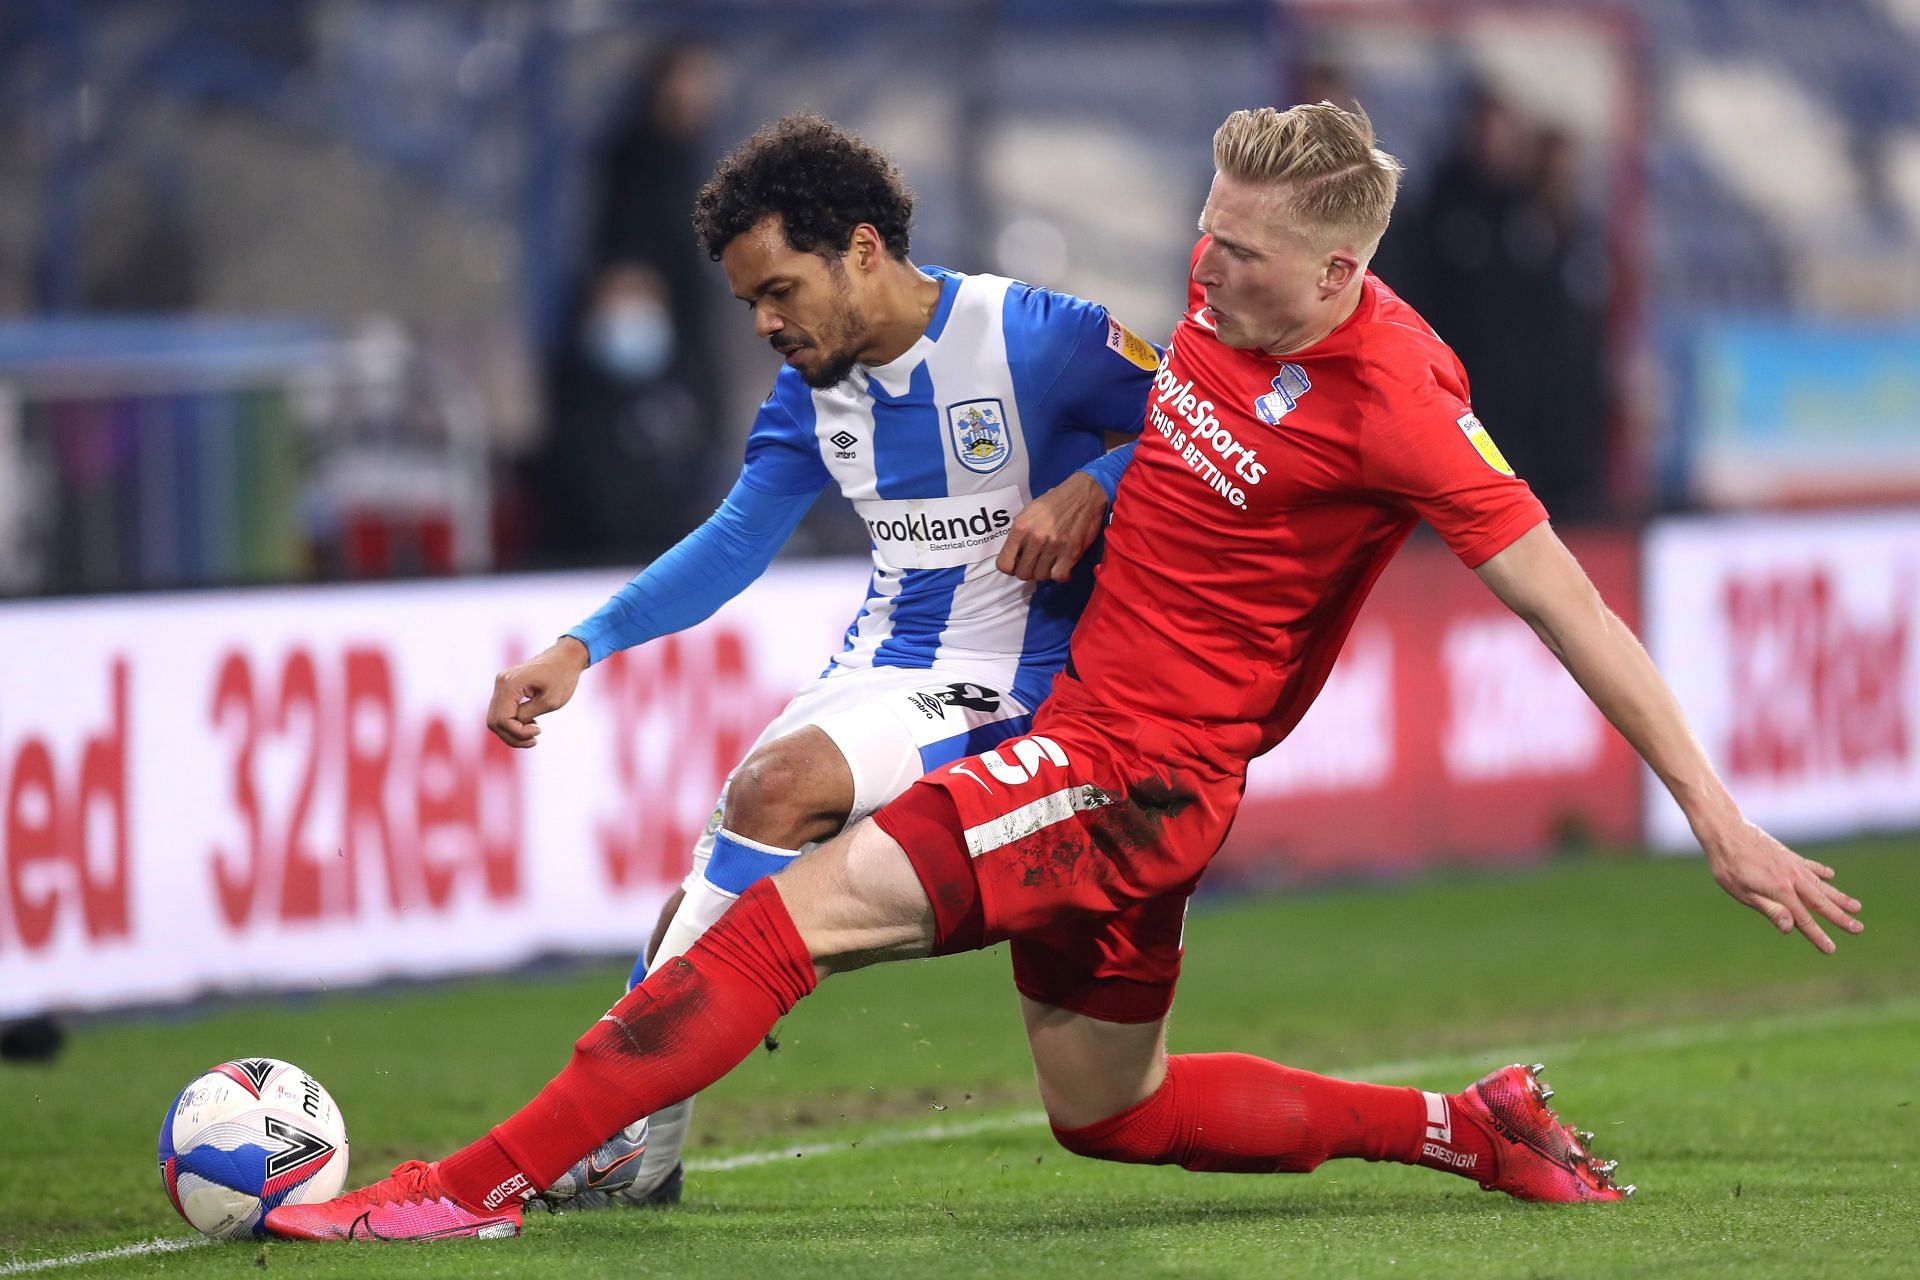 Huddersfield and Birmingham have drawn their last two encounters